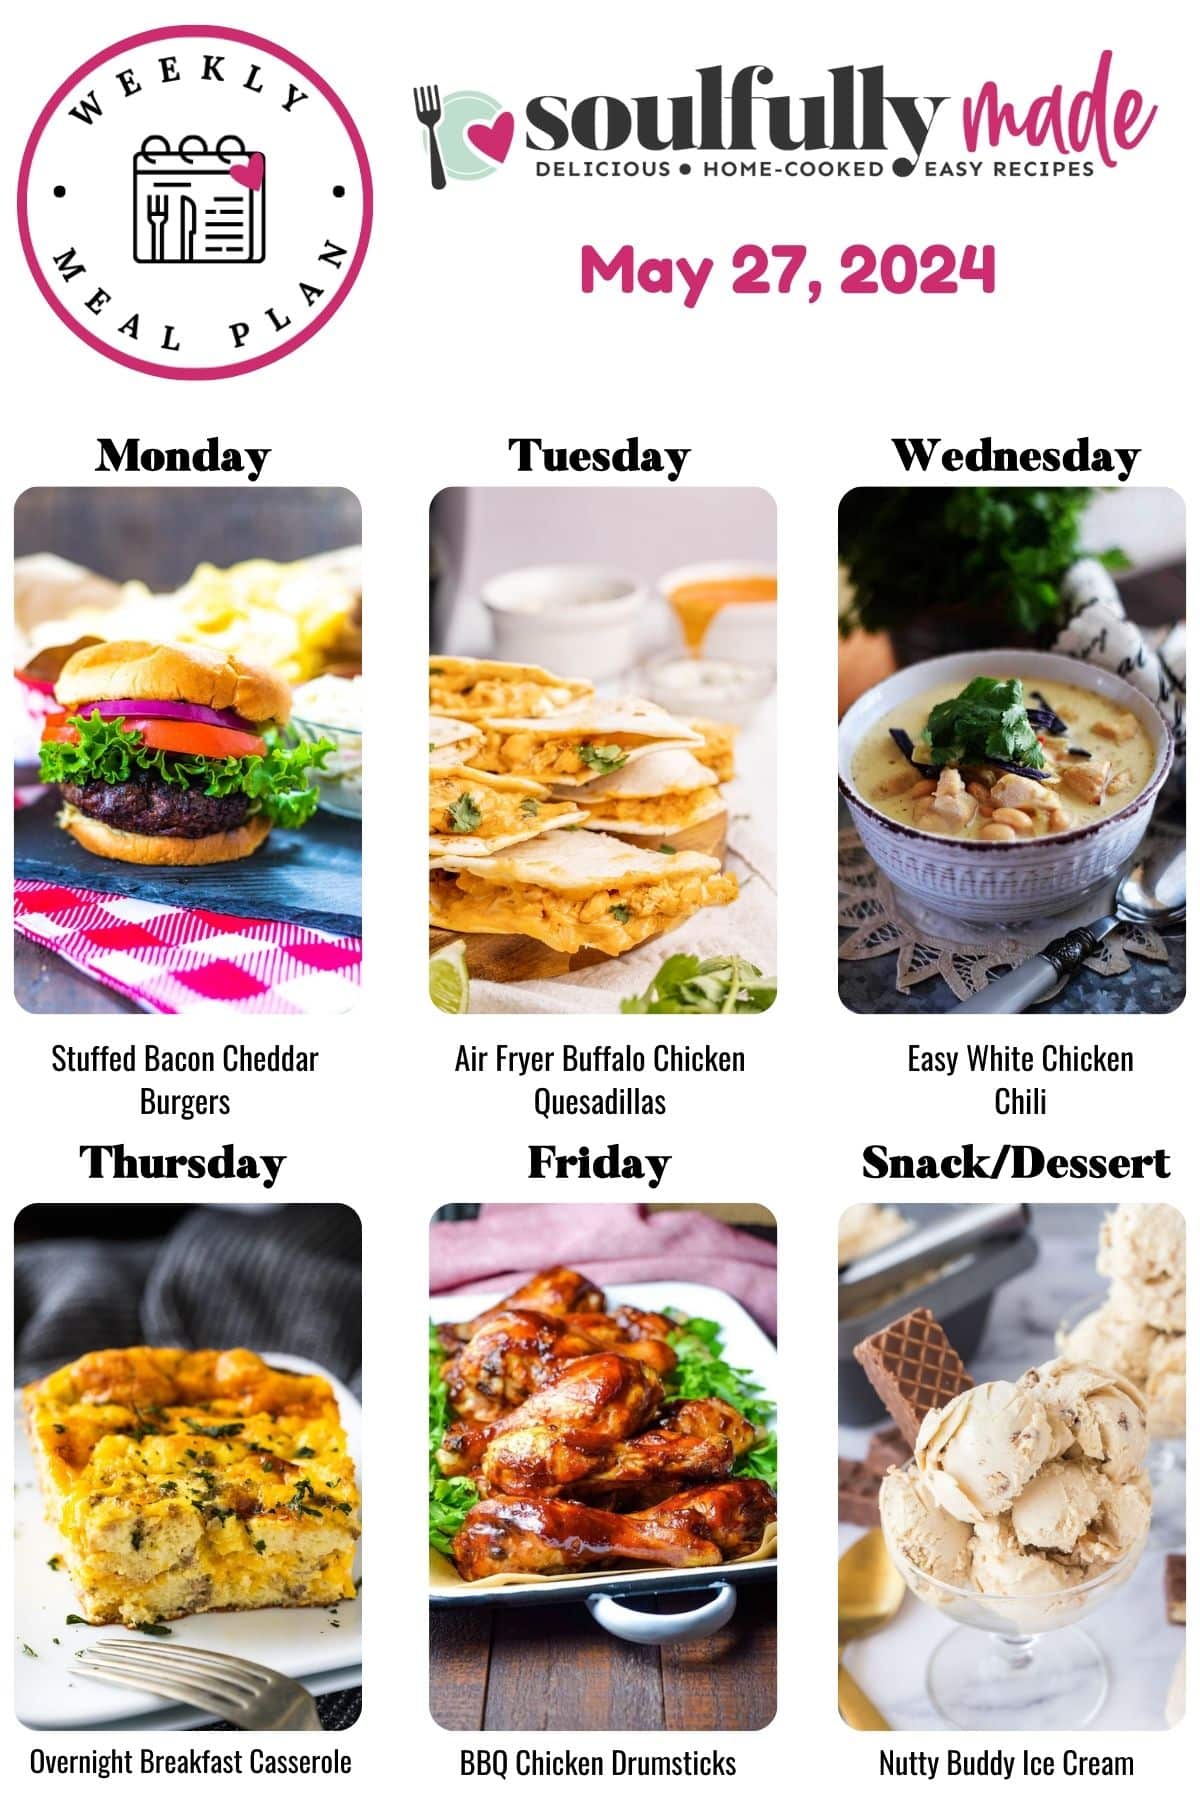 Weekly meal plan for May 27, 2024 including stuffed bacon cheddar burgers, air fryer buffalo chicken quesadillas, white chicken chili, breakfast casserole, bbq chicken drumsticks, and nutty buddy ice cream for dessert.